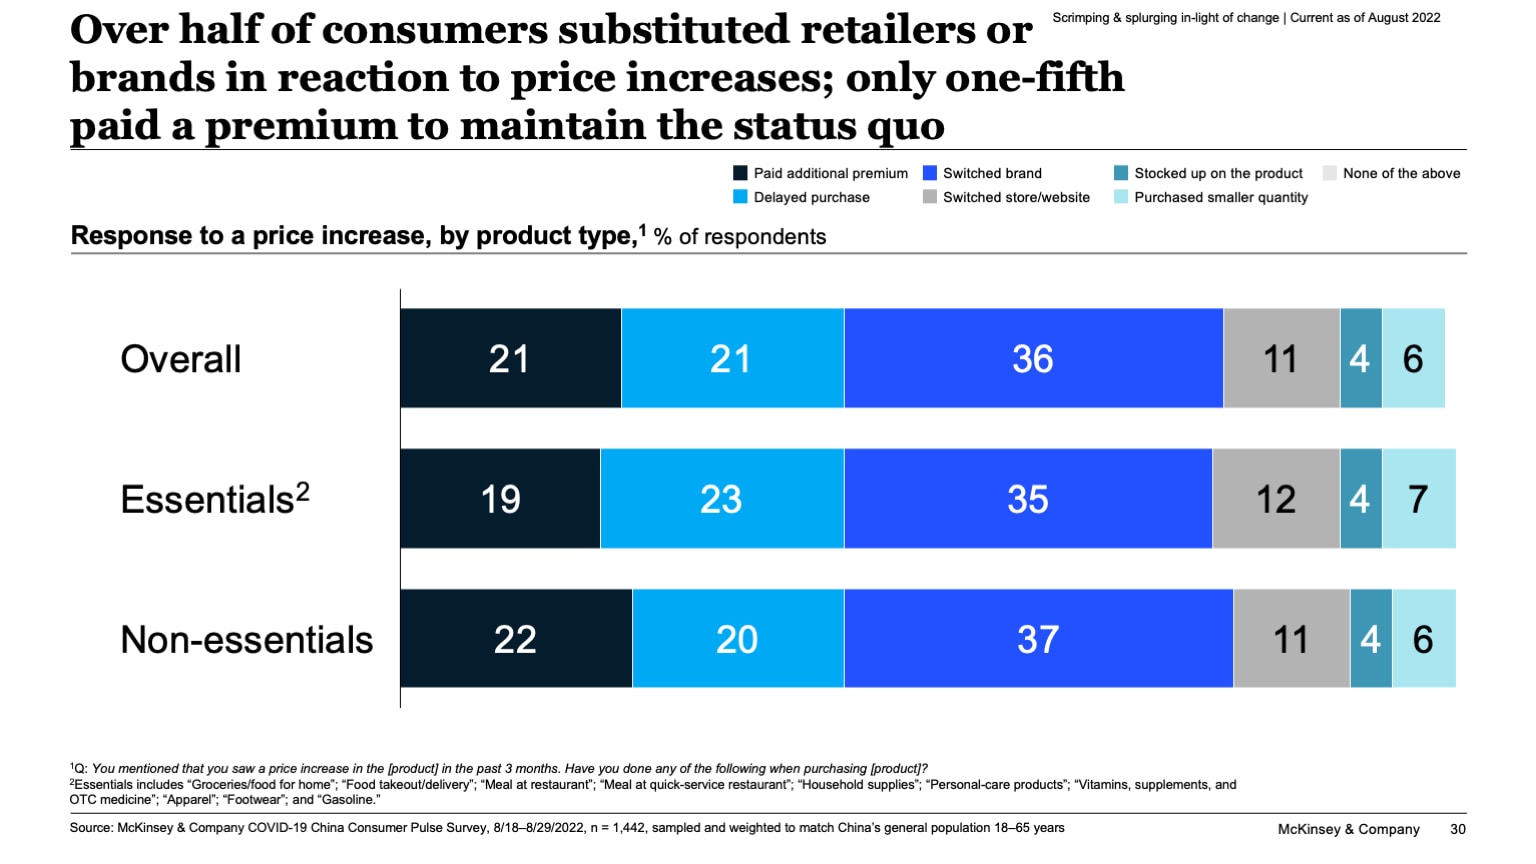 Over half of consumers substituted retailers or brands in reaction to price increases; only one-fifth paid a premium to maintain the status quo